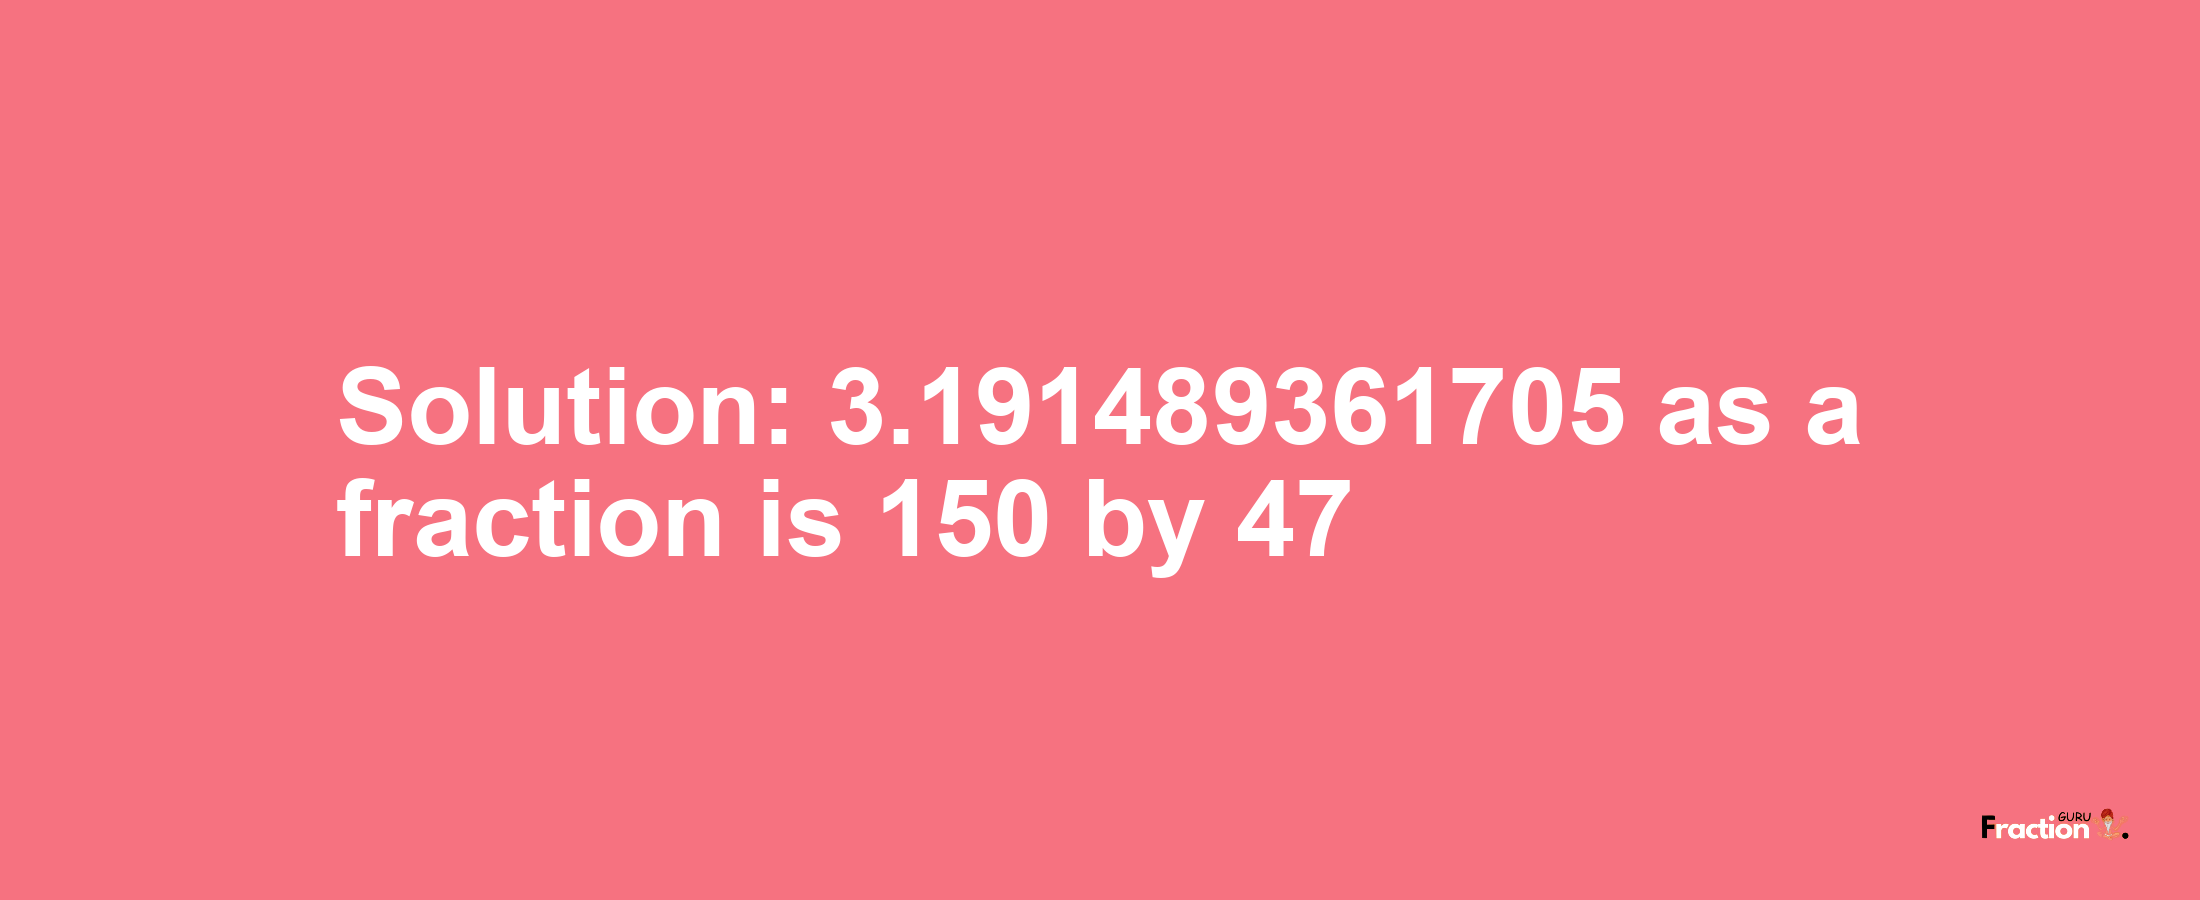 Solution:3.191489361705 as a fraction is 150/47